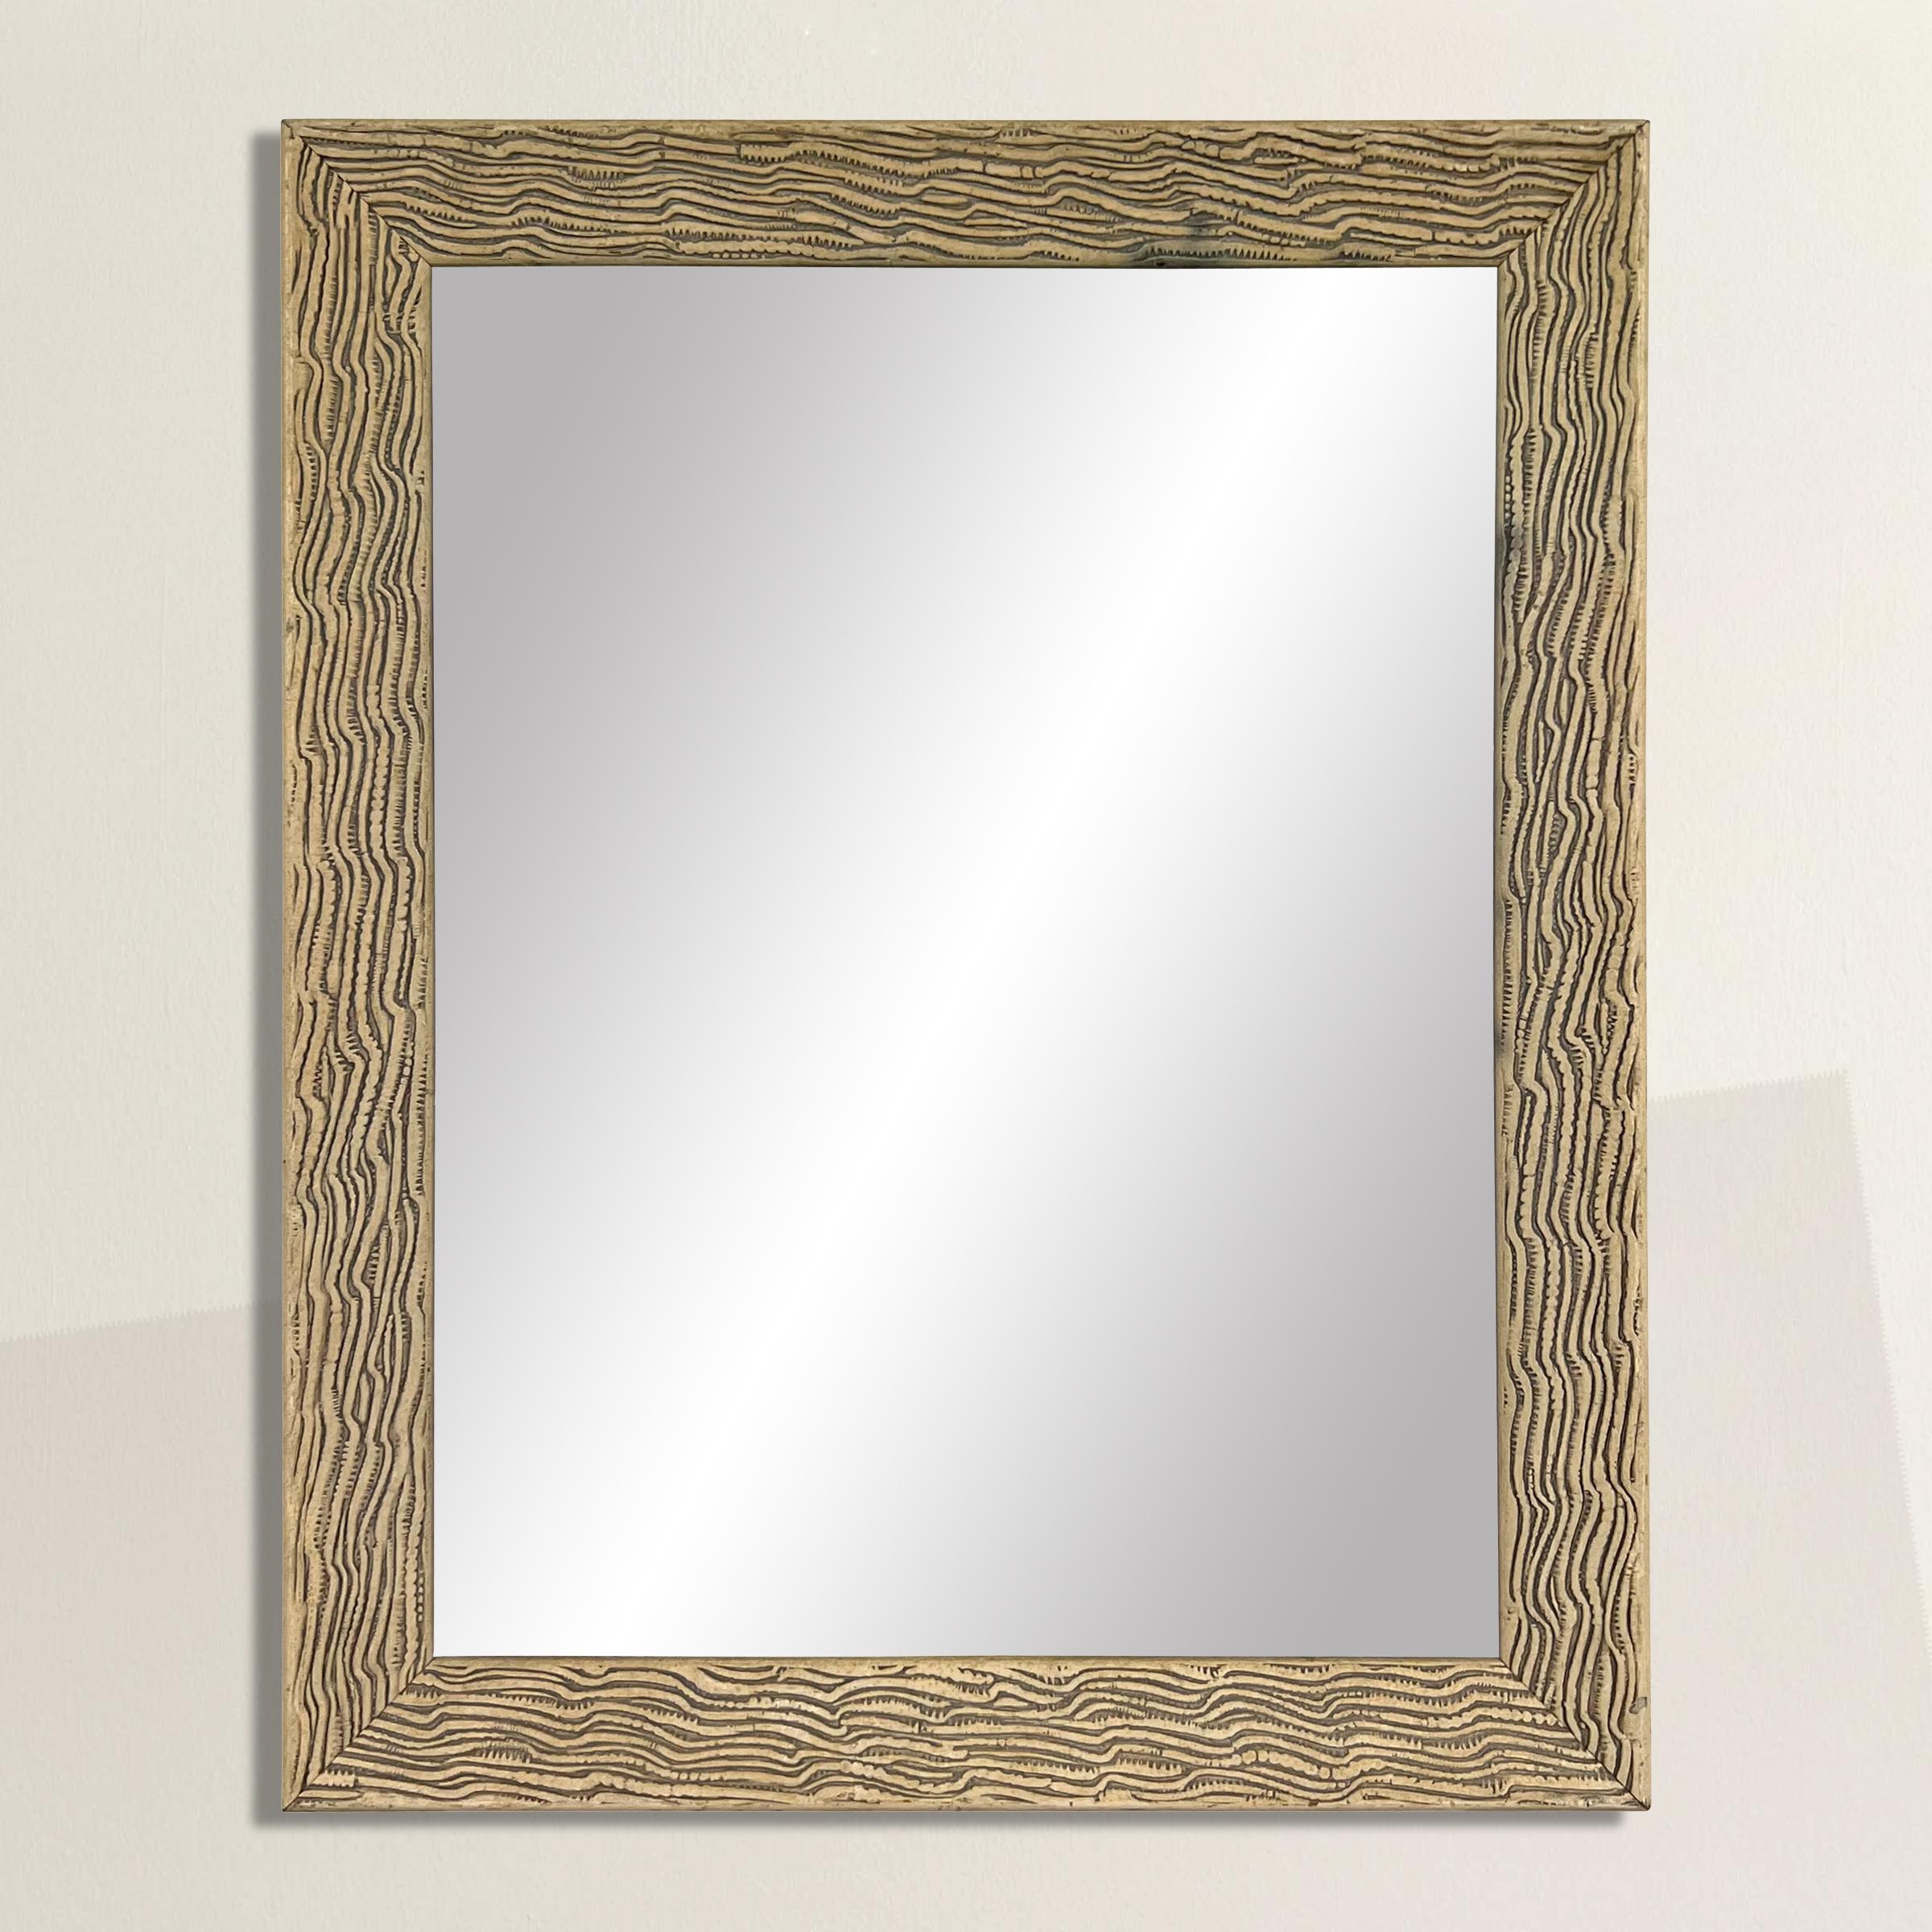 This mid-20th century American mirror exudes rustic charm and chic sophistication with its hand-etched frame, skillfully mimicking the organic patterns of wood grain or deer antler markings. The unique blend of rustic and chic aesthetics makes it a